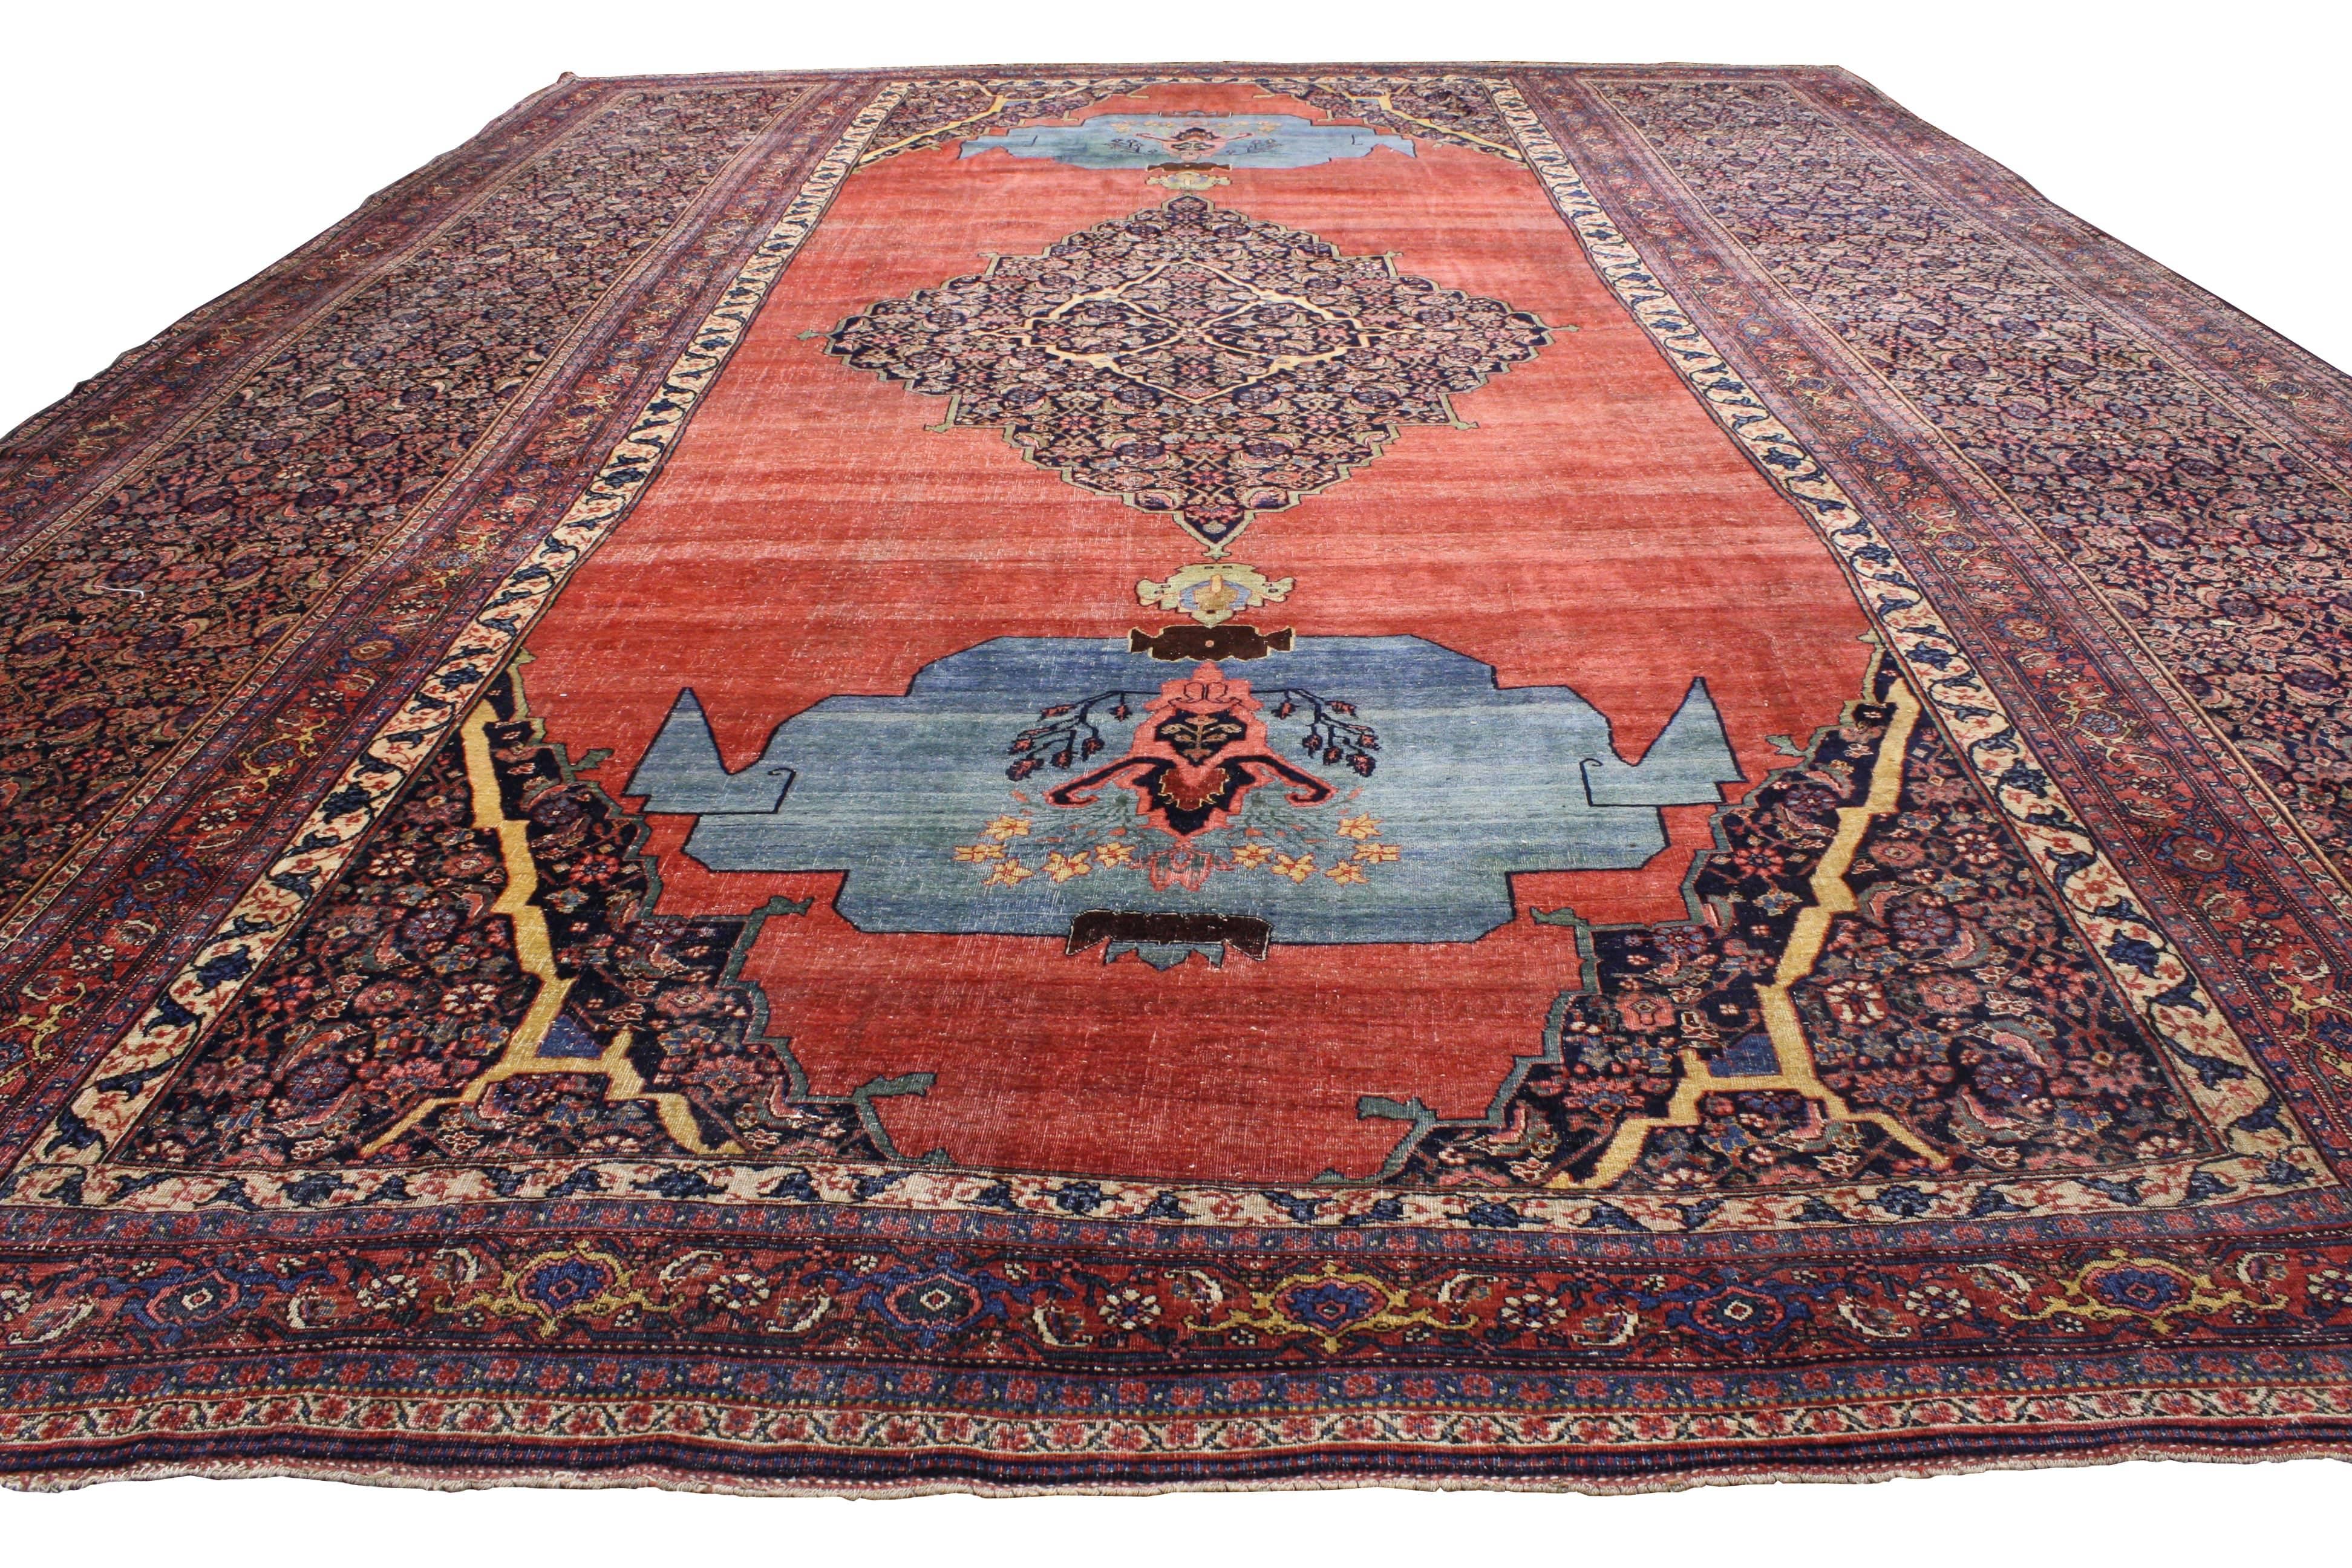 A dynamic and exciting composition, this gorgeous late 19th century Bidjar rug from the 1880s showcases some of the finer qualities exhibited by the Persian iron rug of Iran. This antique Bijar is a historical rug woven in the village of Halvei,